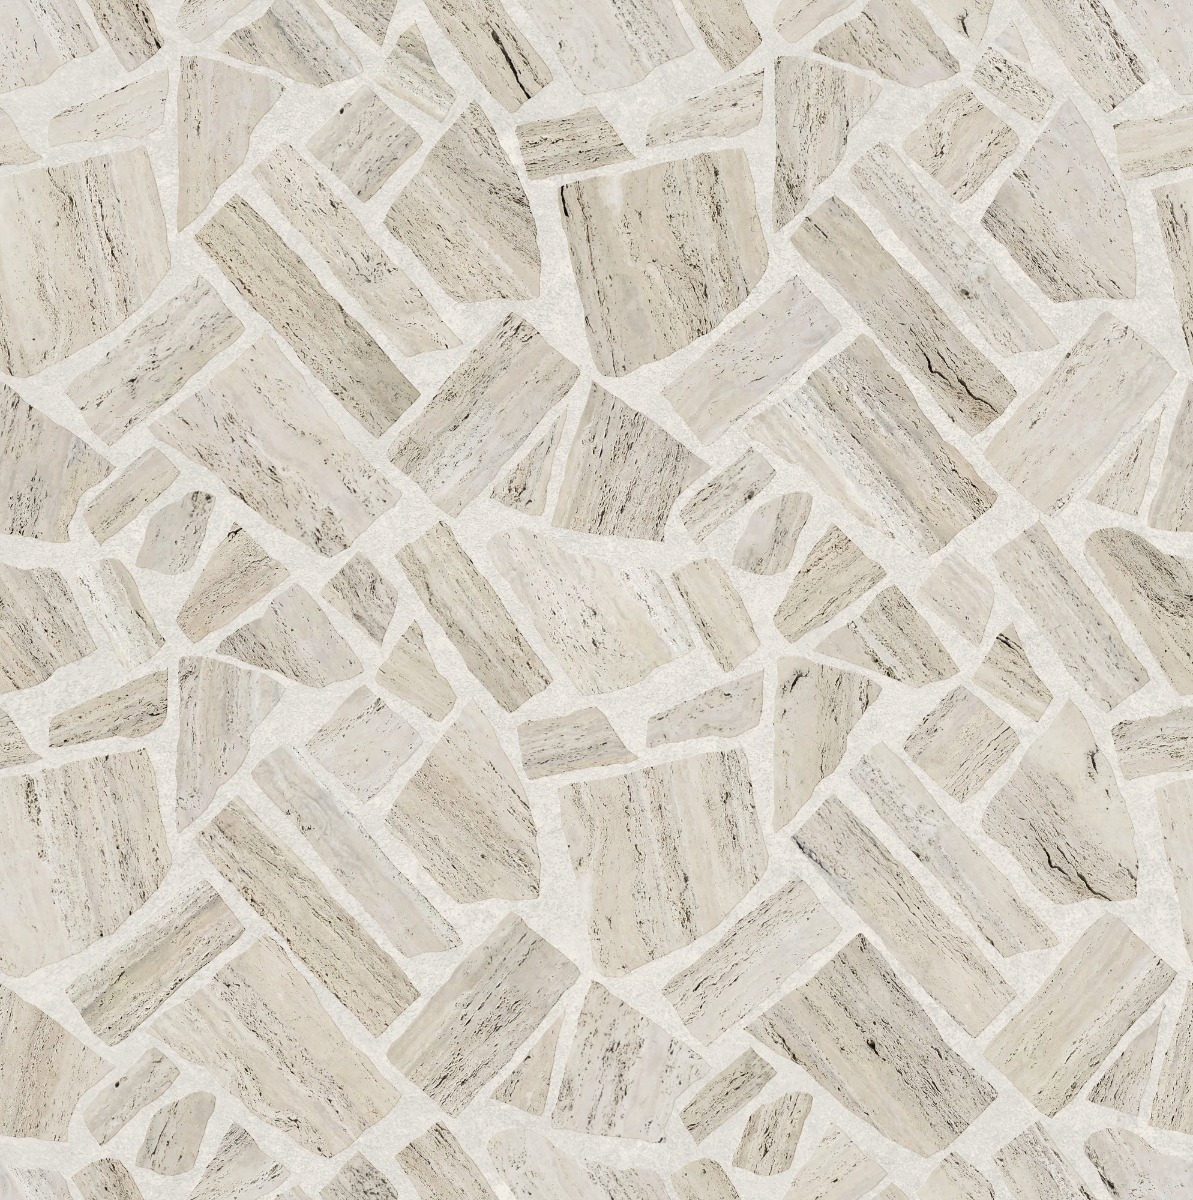 A seamless stone texture with travertine blocks arranged in a Ionian pattern